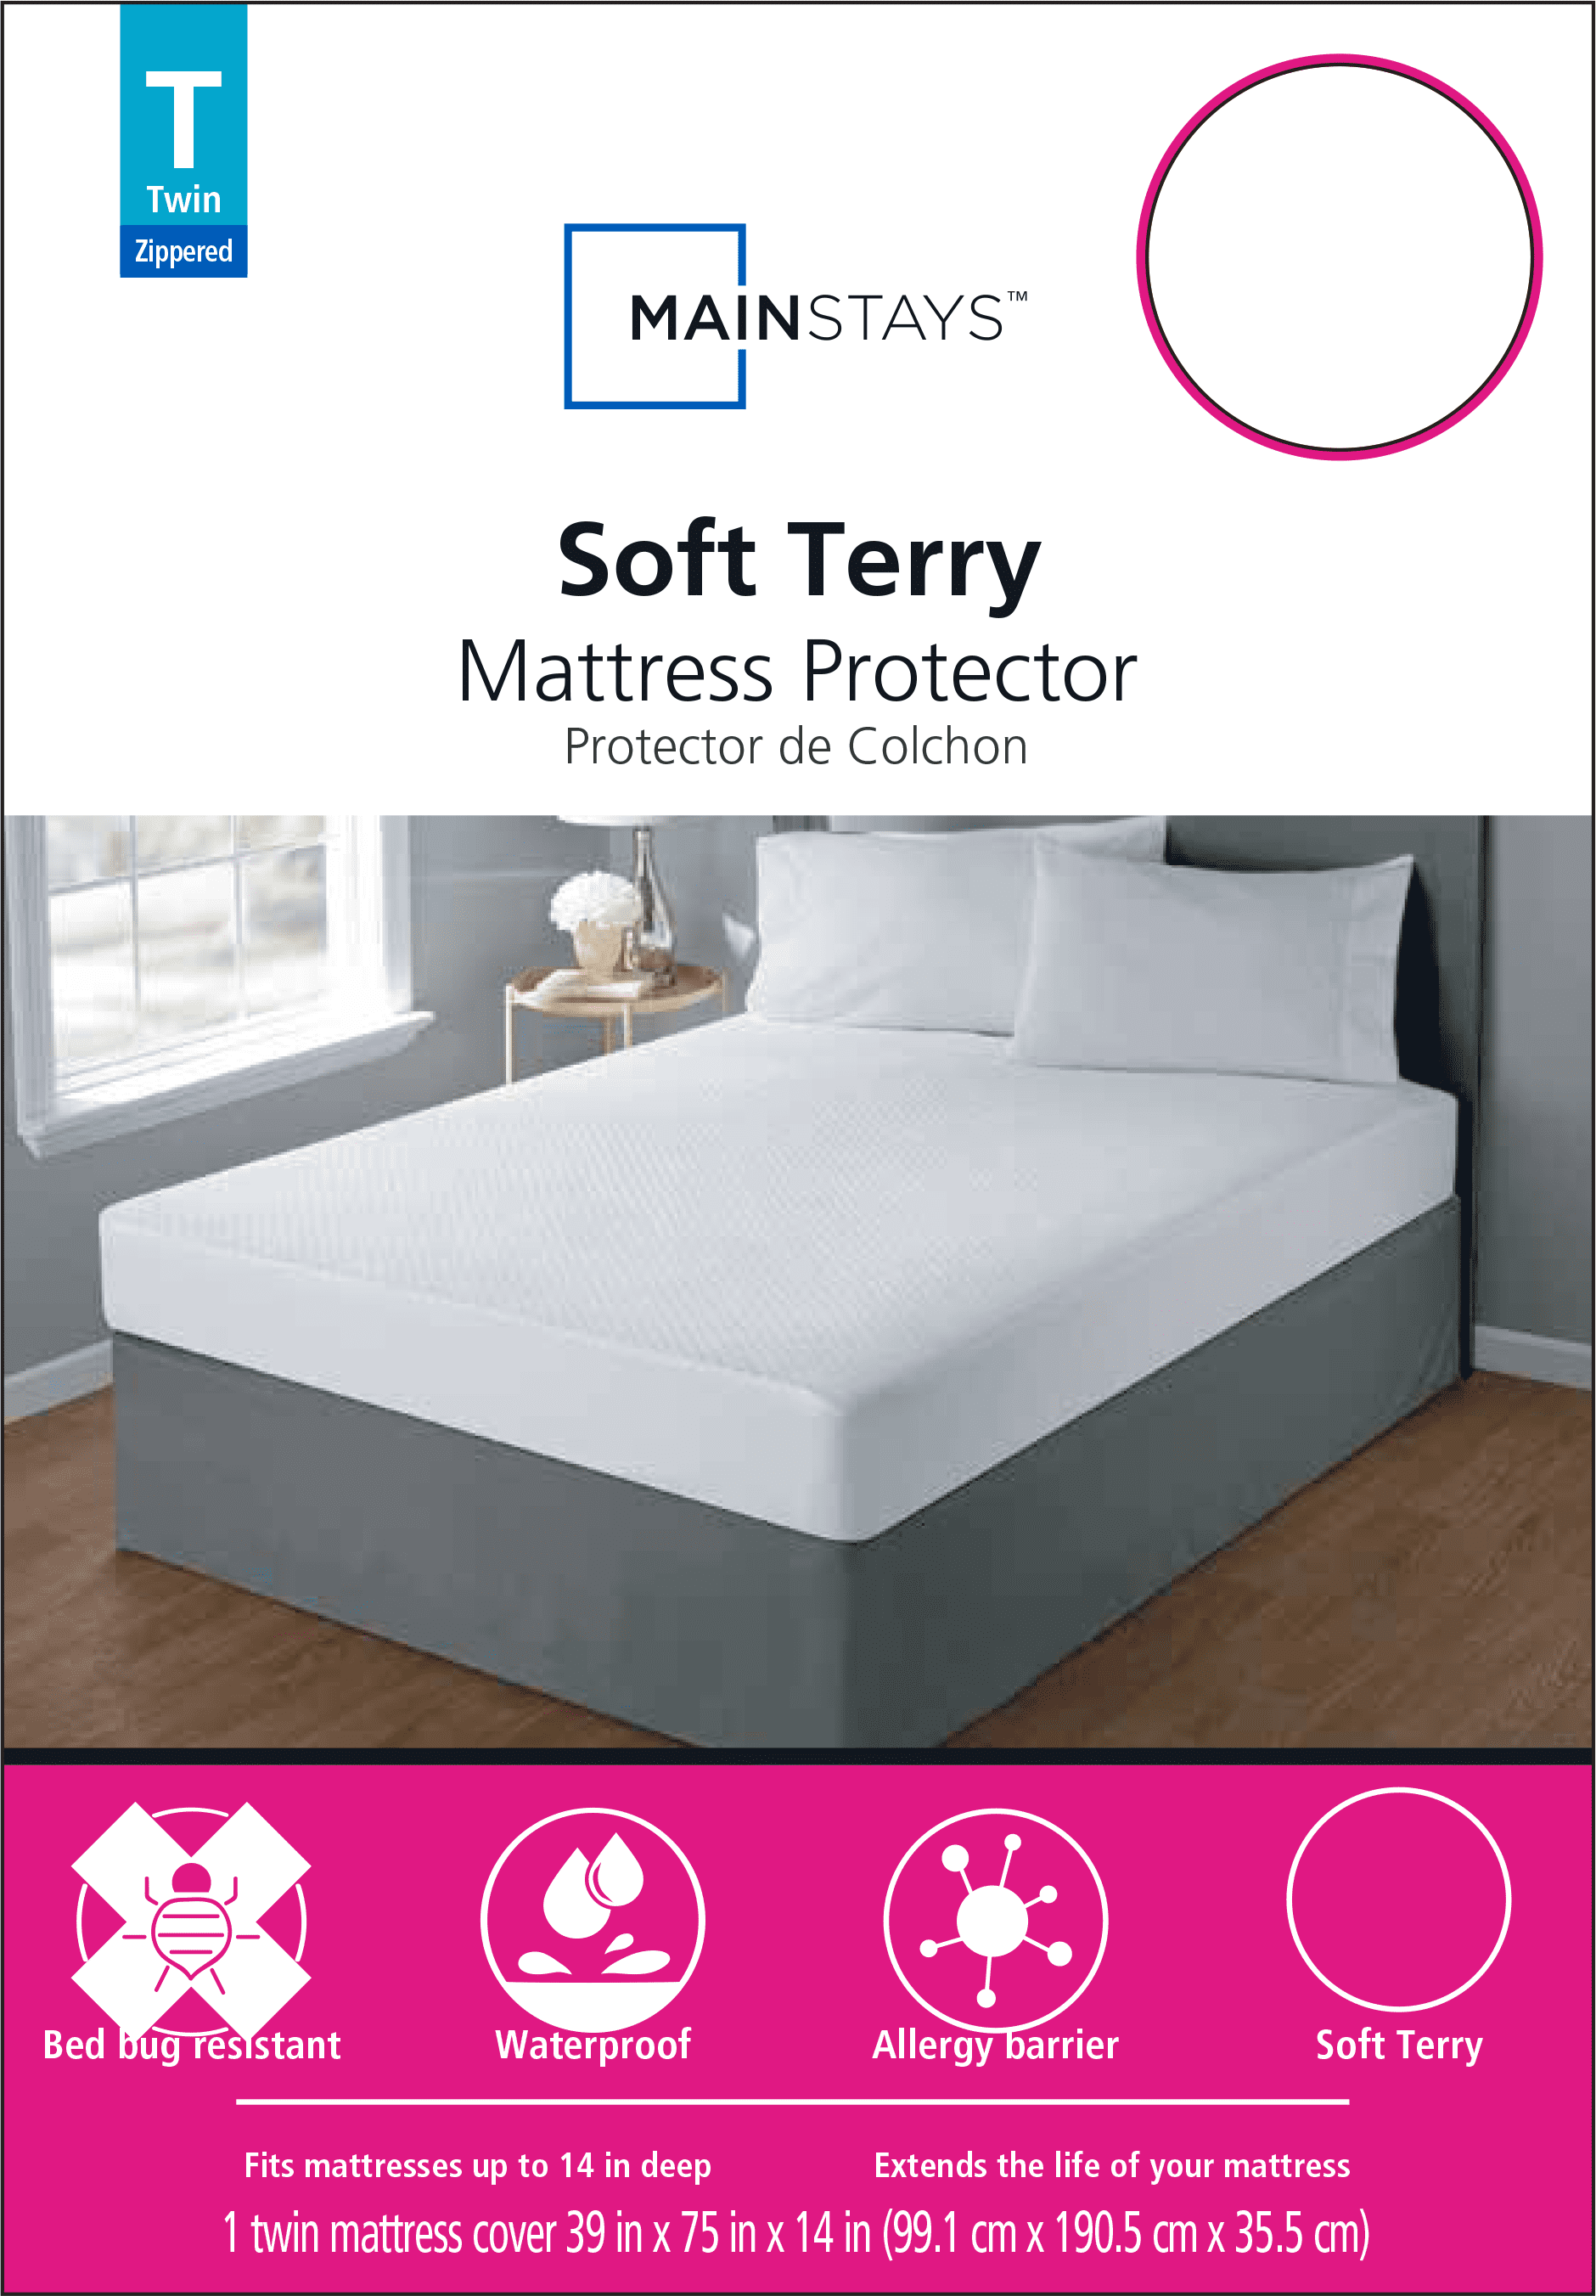 Waterproof Mattress Protector Full Mattress Pad Cover Noiseless Full Mattress Protector Premium Soft Breathable Cotton Terry for Pets Kids Adults 54 x 75